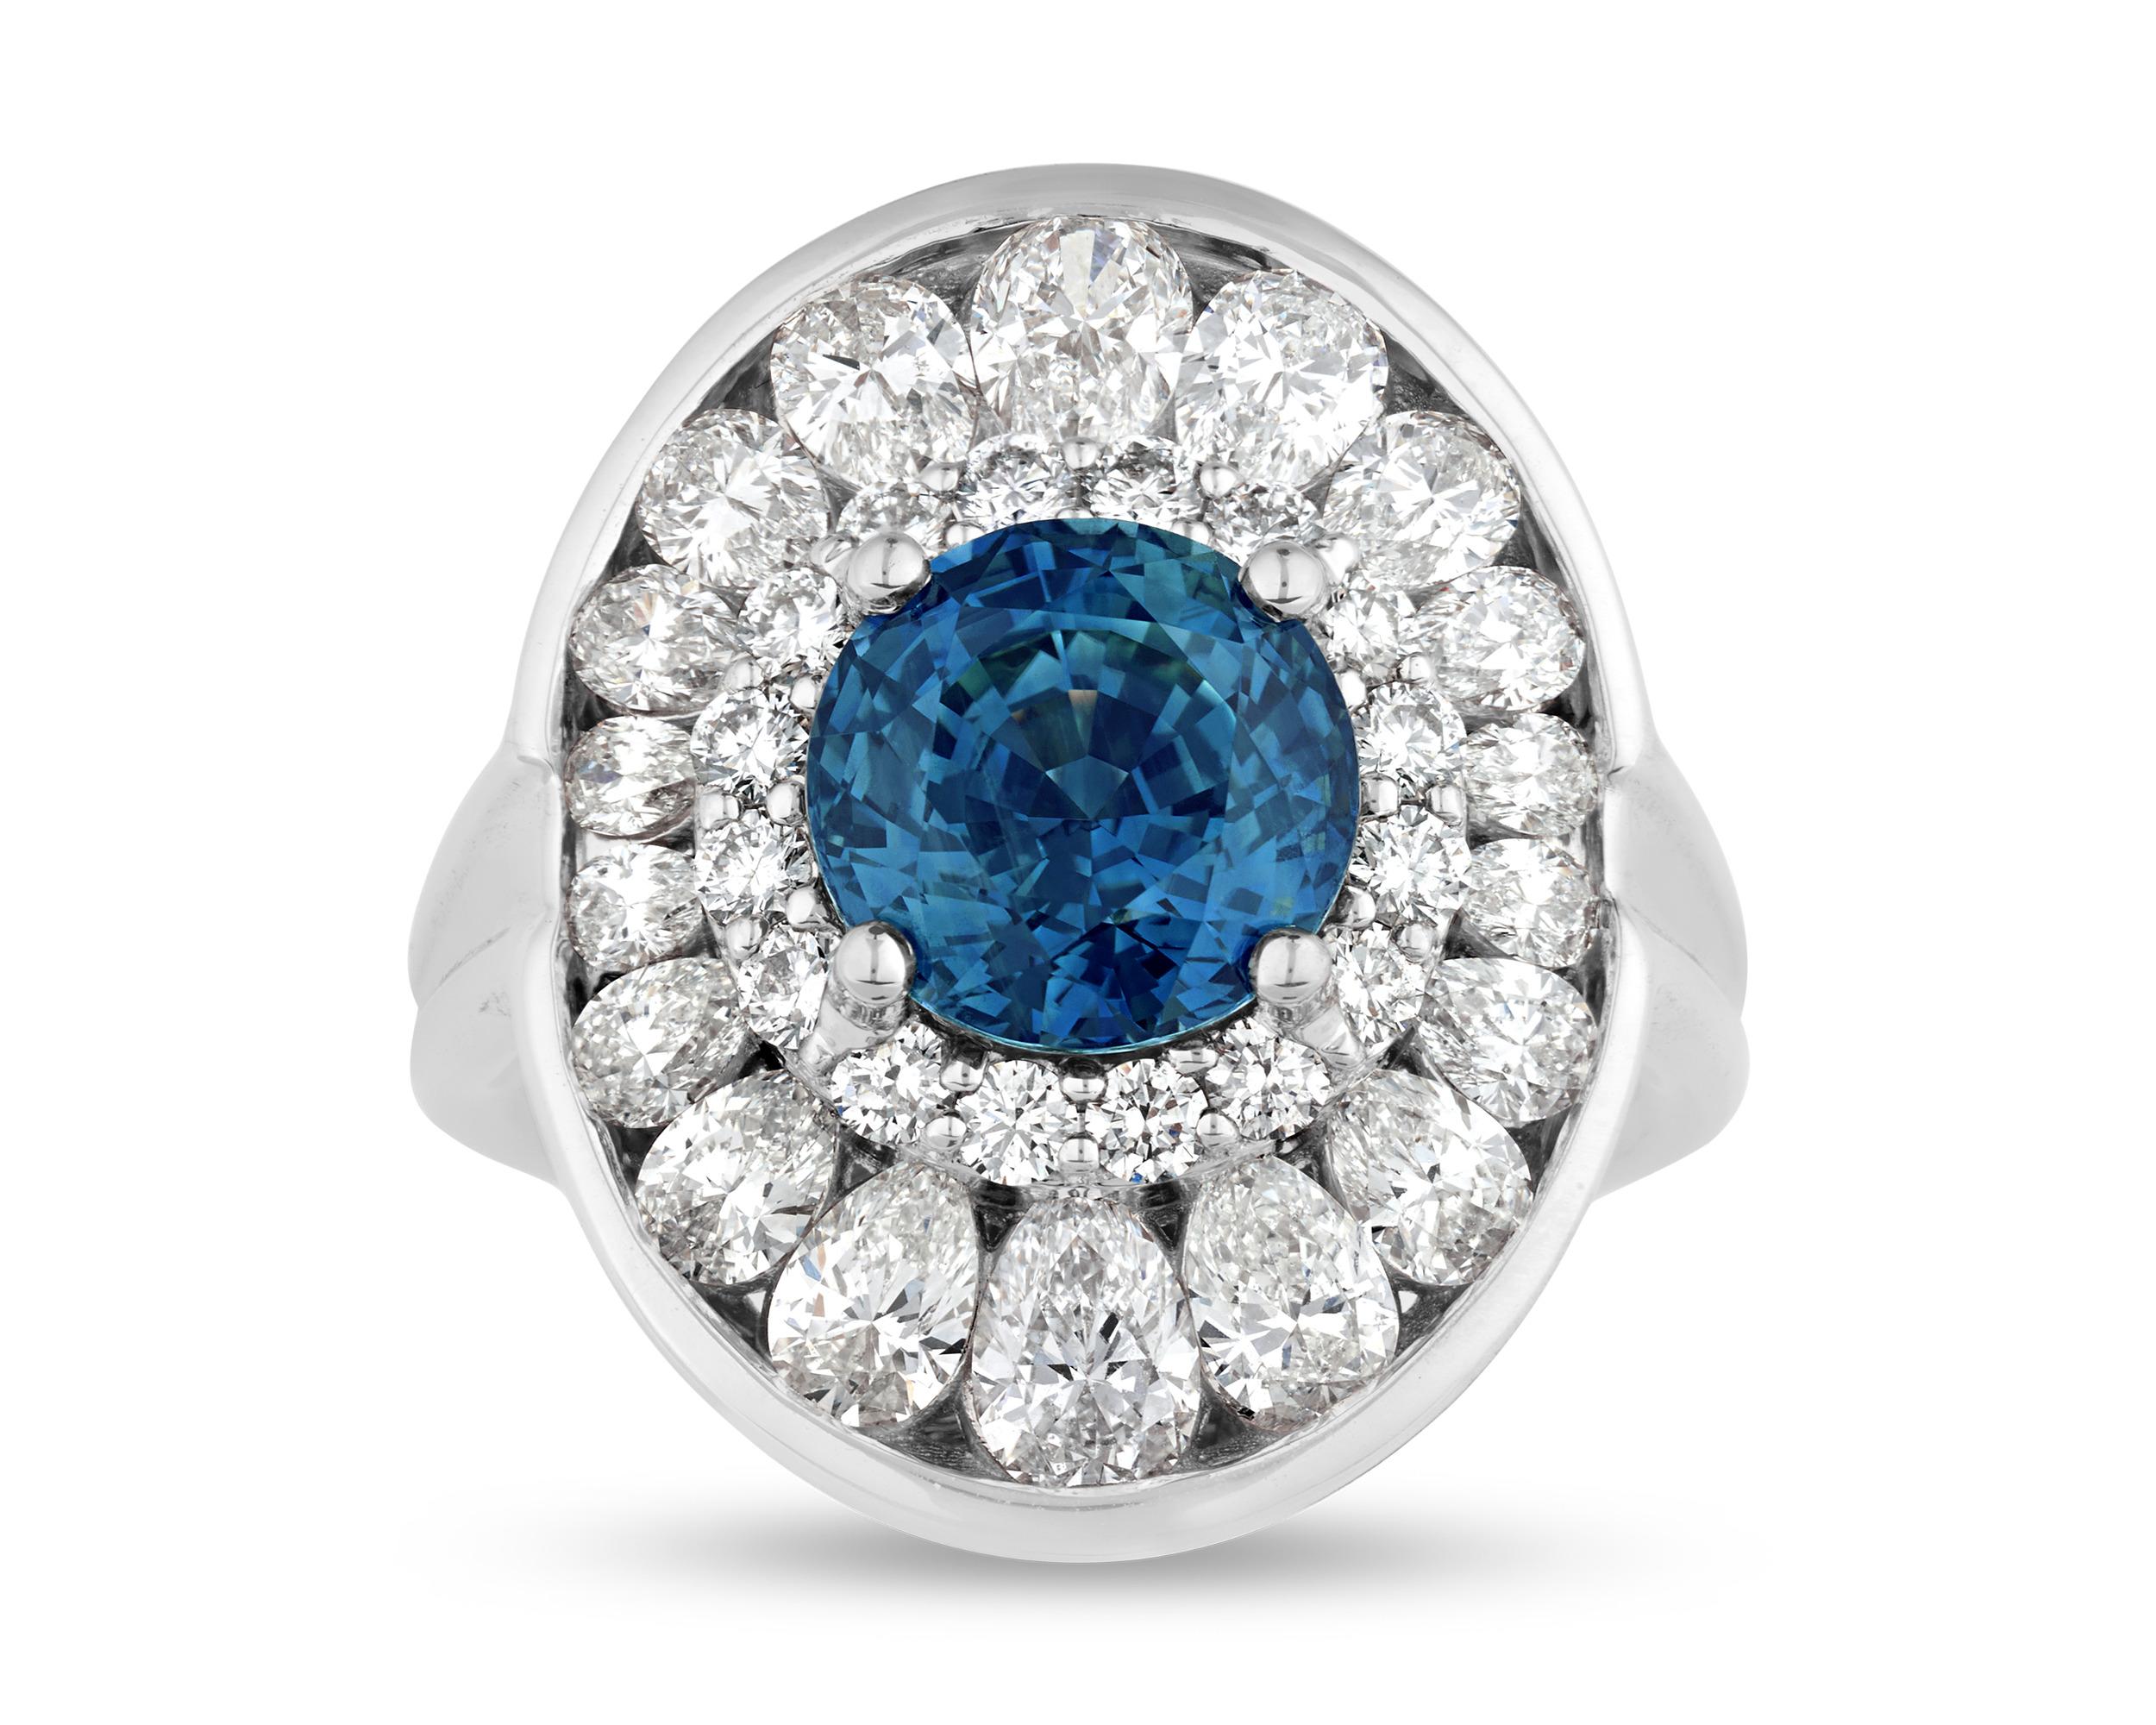 Brilliant Cut Untreated Teal Sapphire Ring, 4.03 Carats For Sale